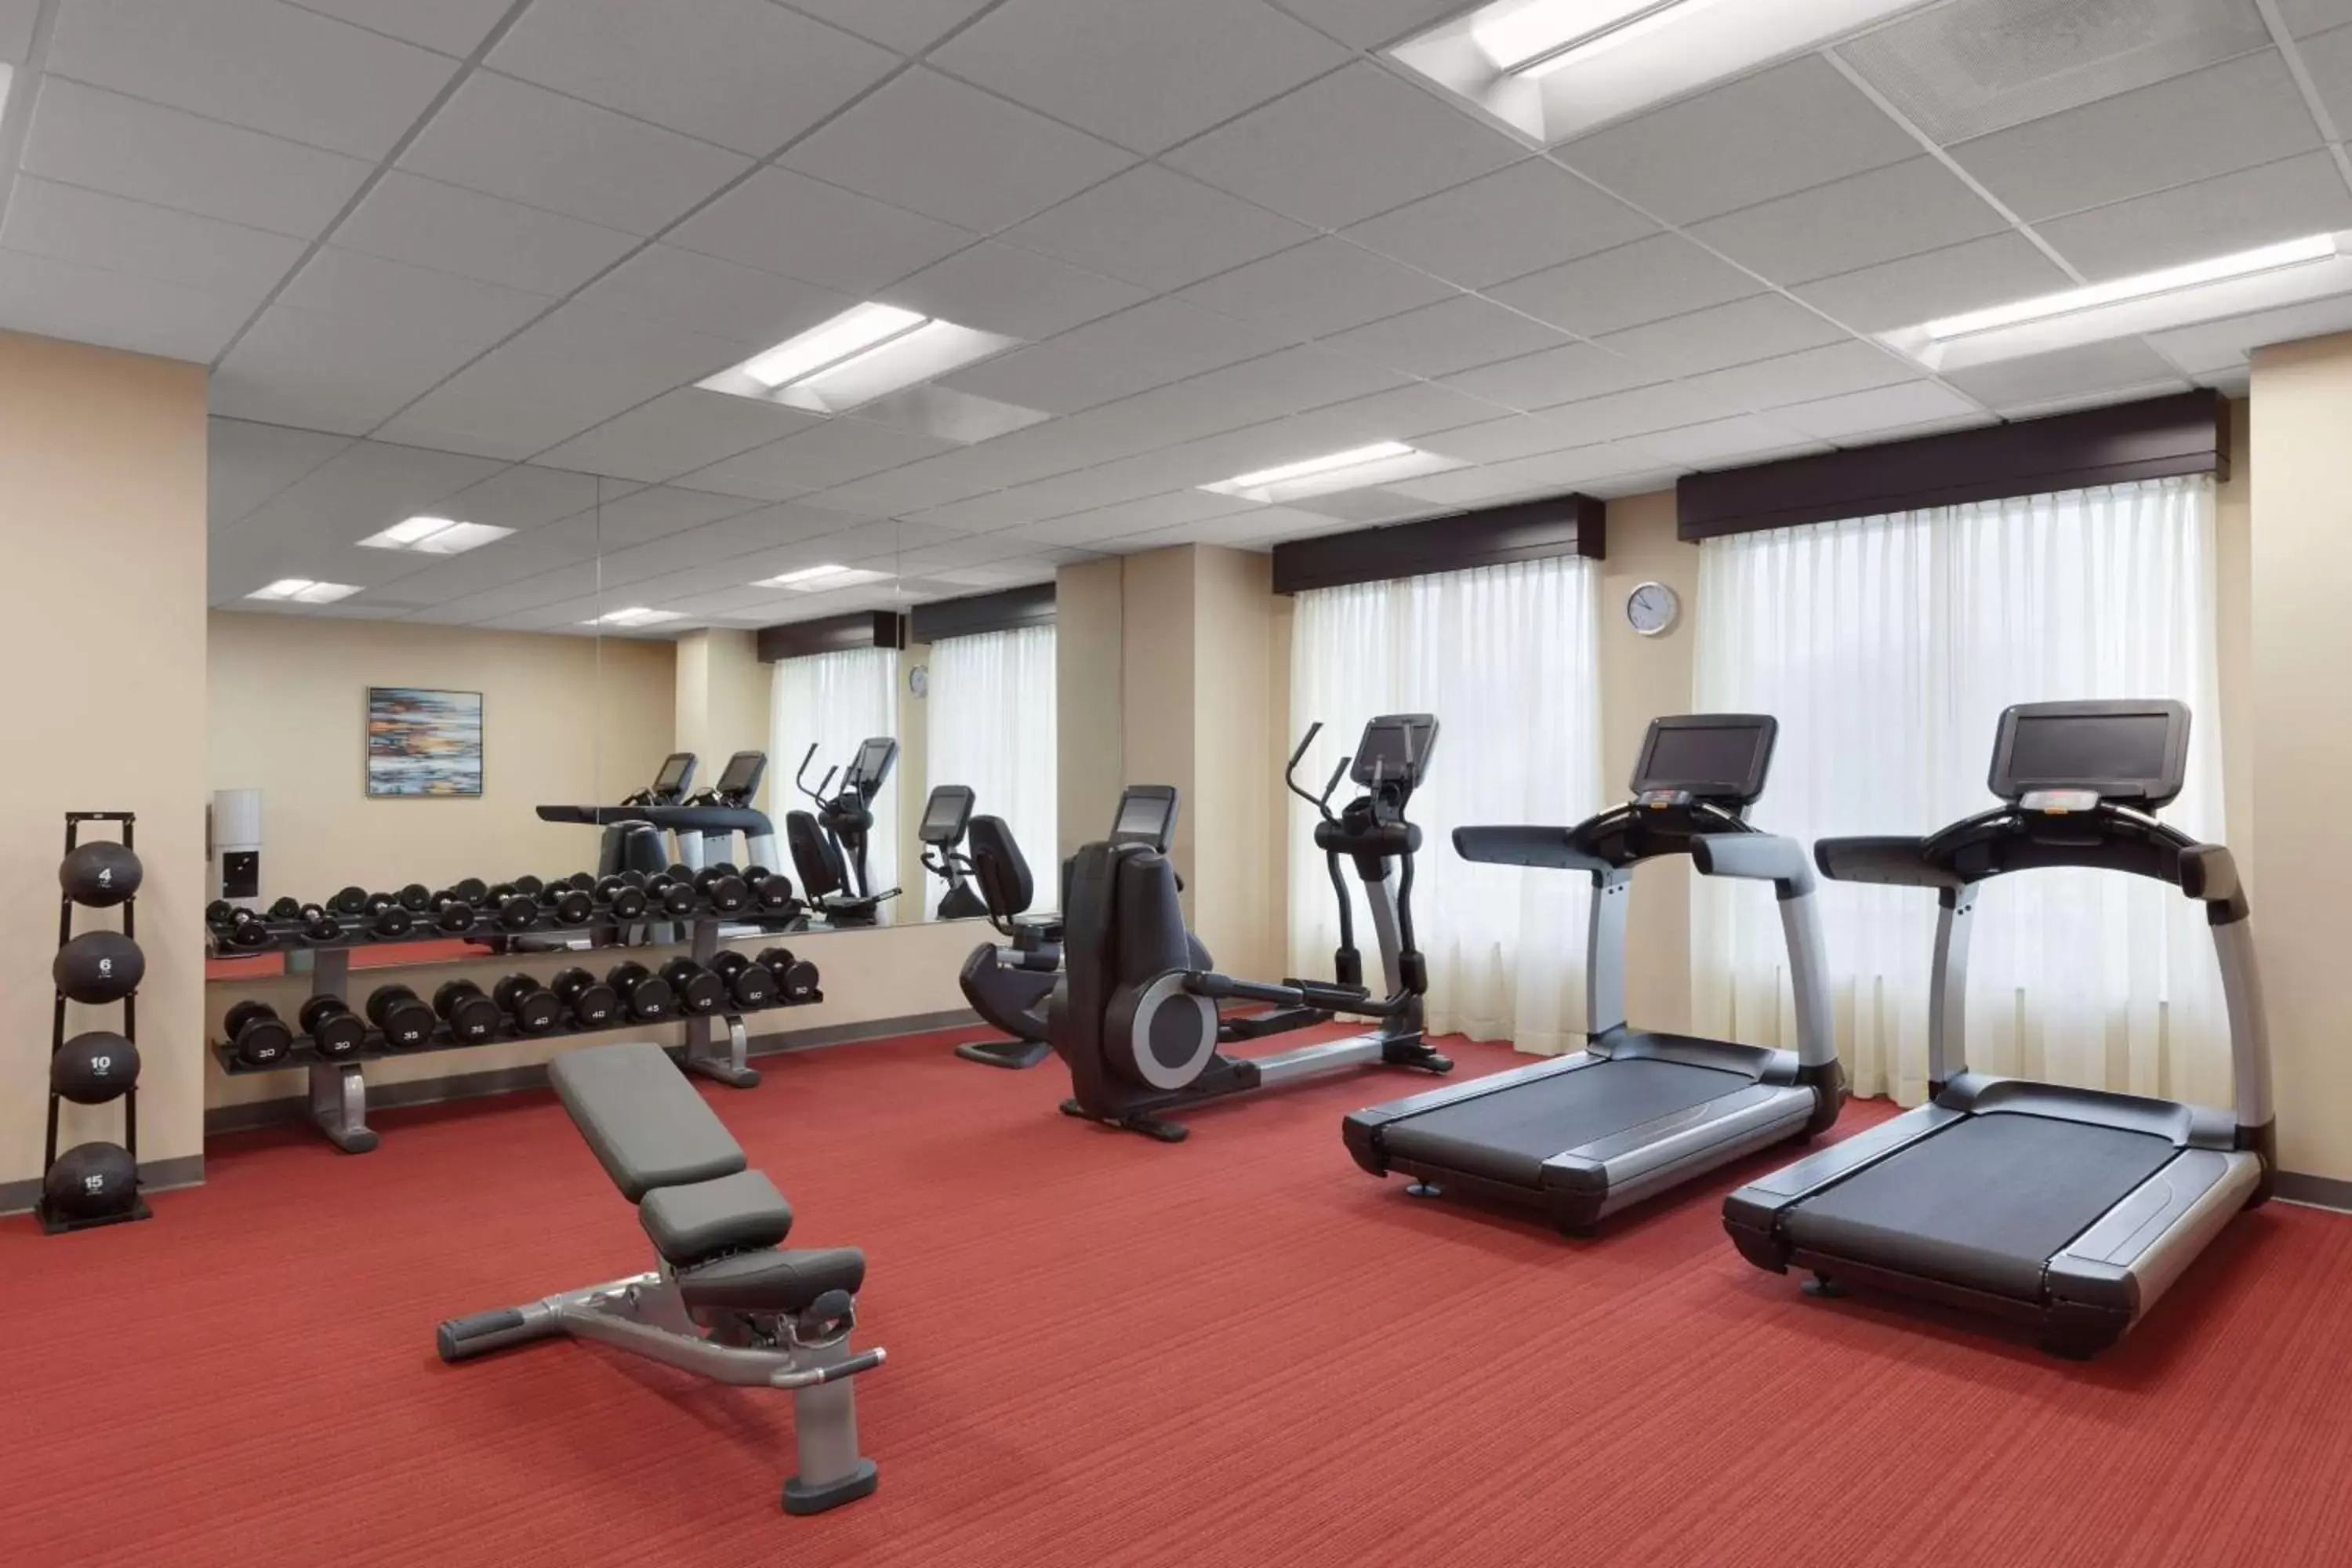 Fitness centre/facilities, Fitness Center/Facilities in Hyatt Place St. Louis/Chesterfield